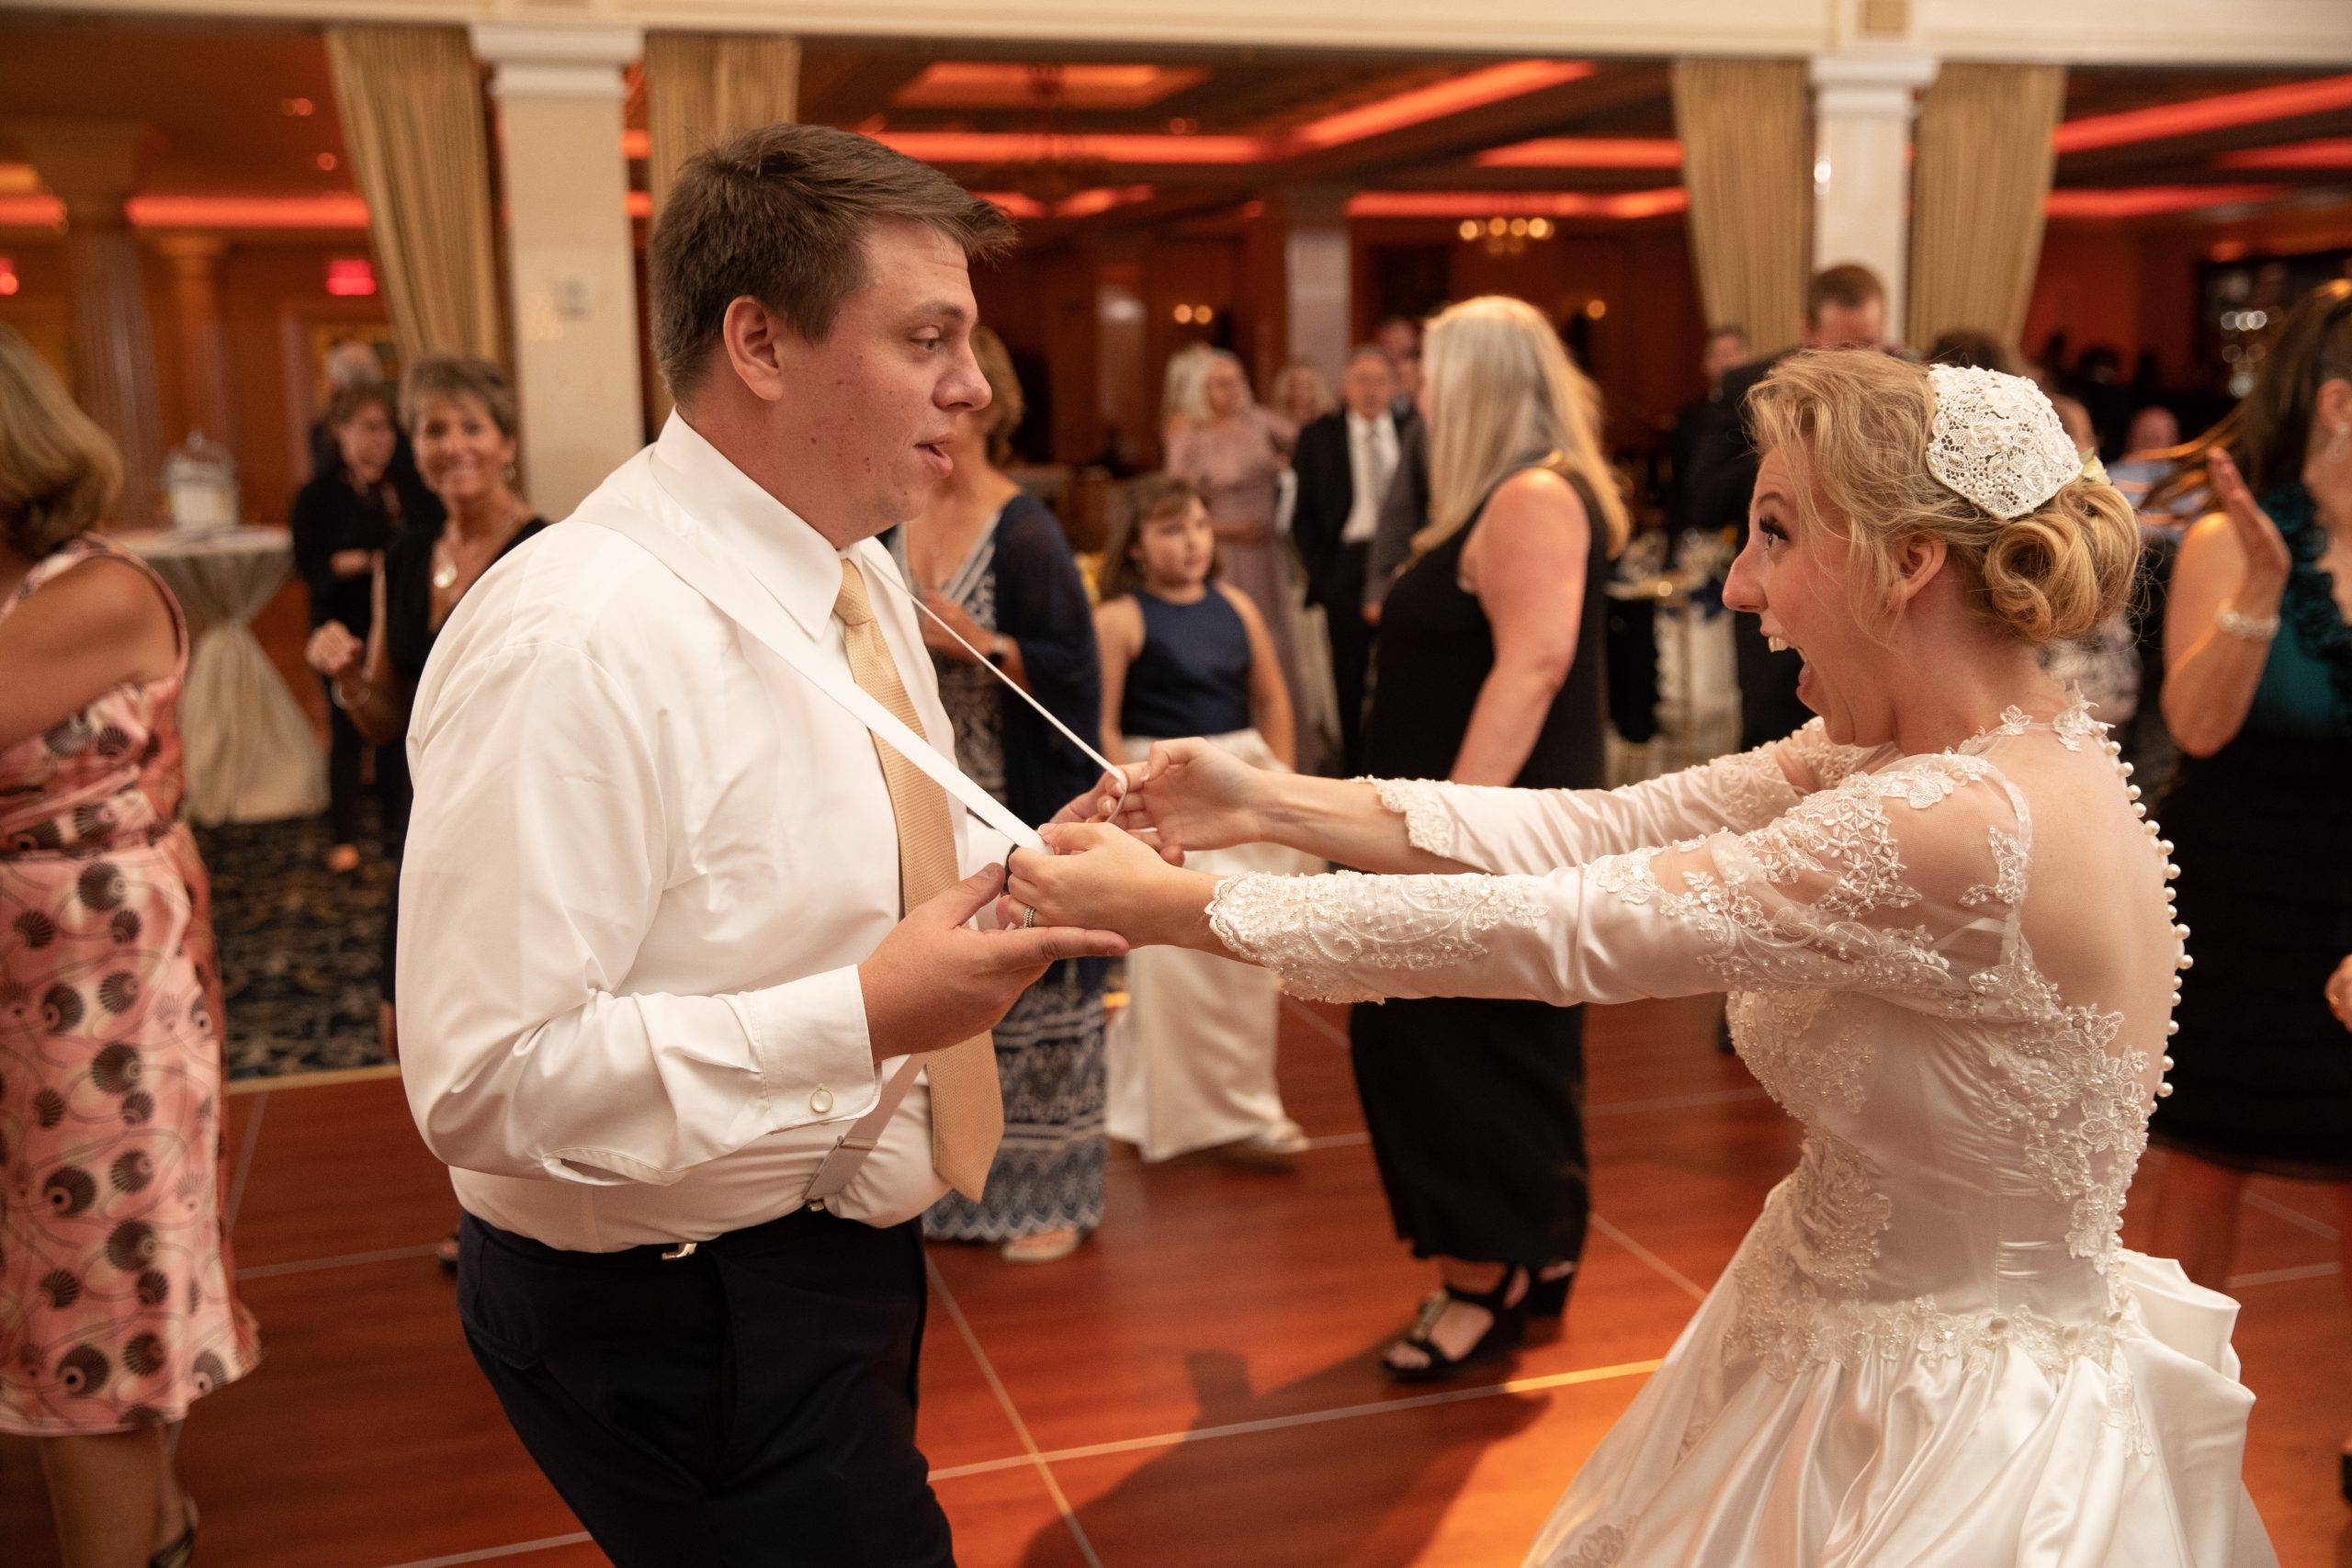 A bride and groom dancing at a wedding reception.